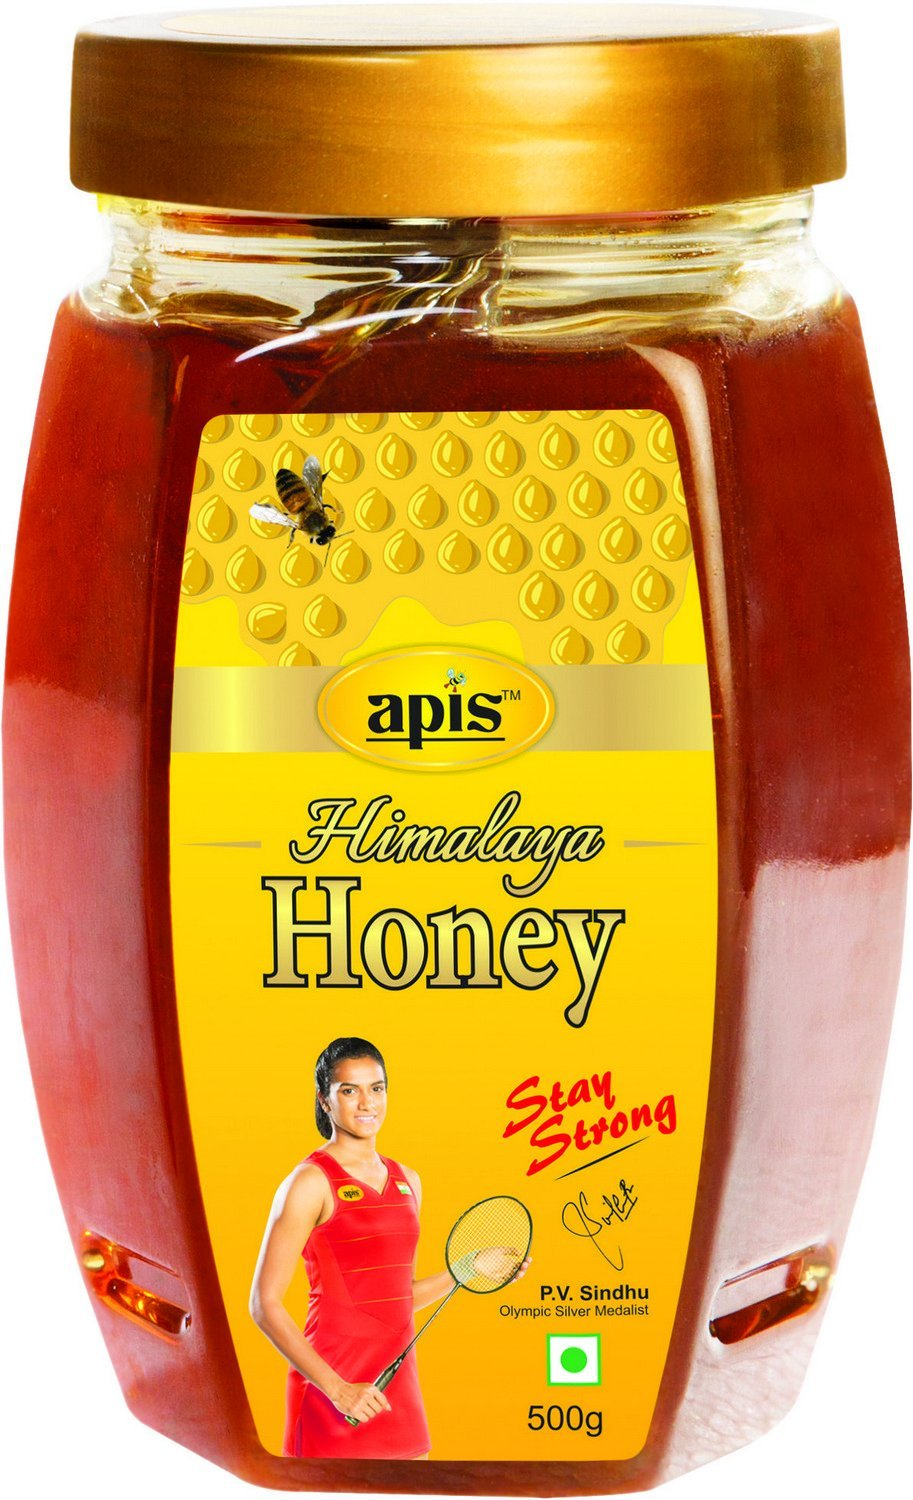 Amazon - Buy Apis Himalaya Honey, 500g (Buy one, get one Free) for Rs.156 only